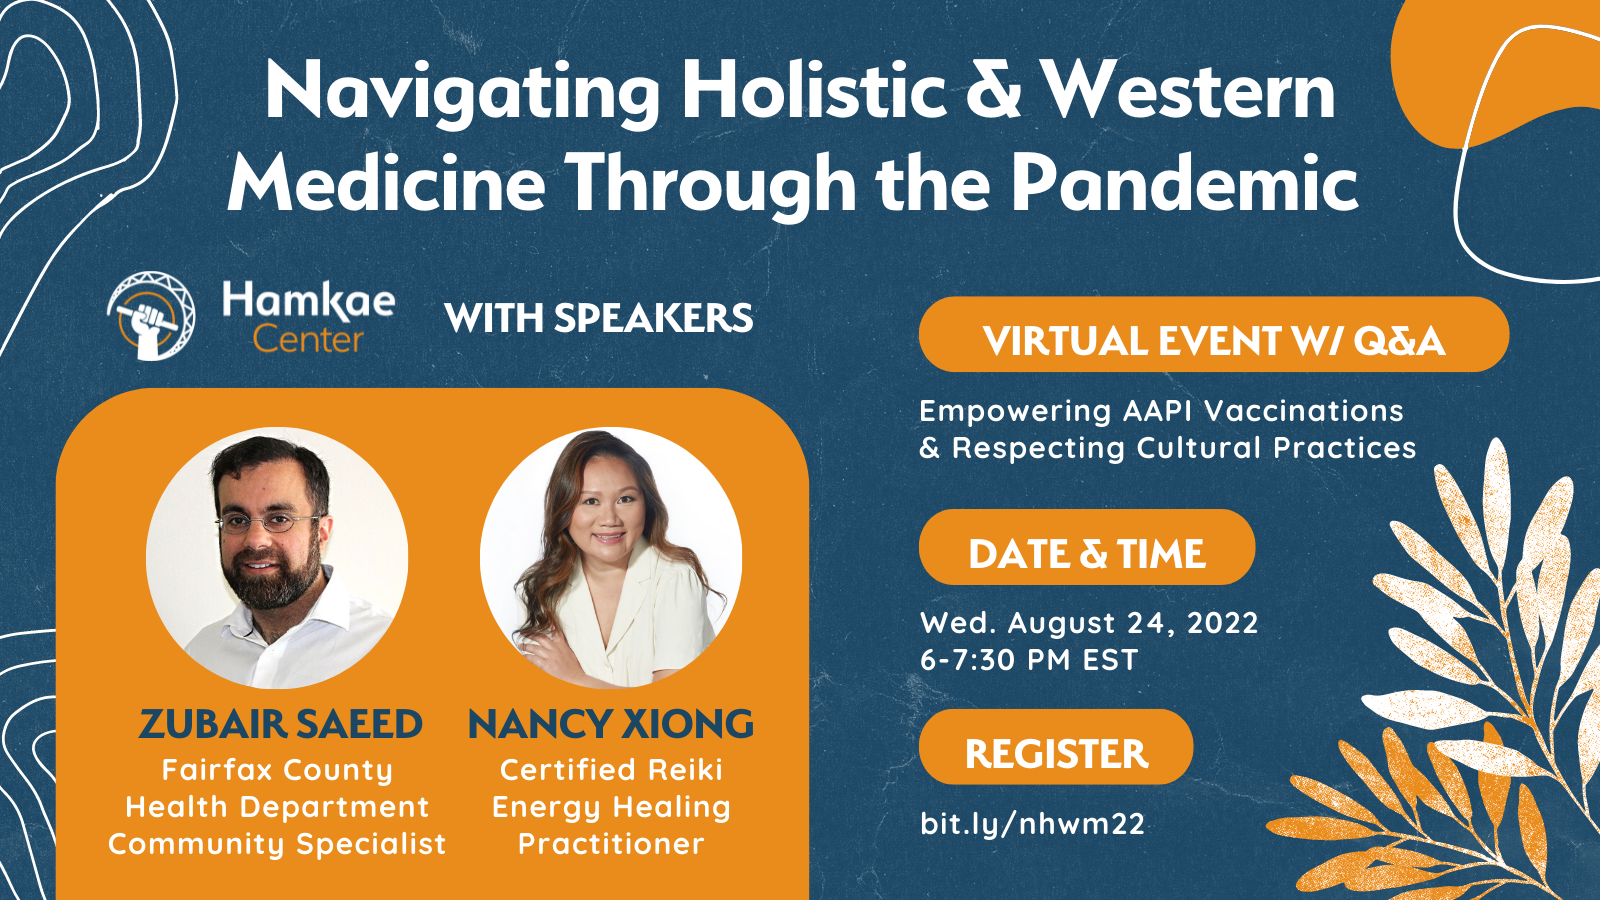 Navigating Holistic & Western Medicine Through the Pandemic: Empowering AAPI Vaccinations & Respecting Cultural Practices Hosted by Hamkae Center, with speakers Zubair Saeed (Fairfax County Health Department Community Specialist) & Nancy Xiong (Certified Reiki Energy Healing Practitioner) Virtual Event w/ Q&A Wed. August 24, 2022 6-7:30pm EST Register: bit.ly/nhwm22